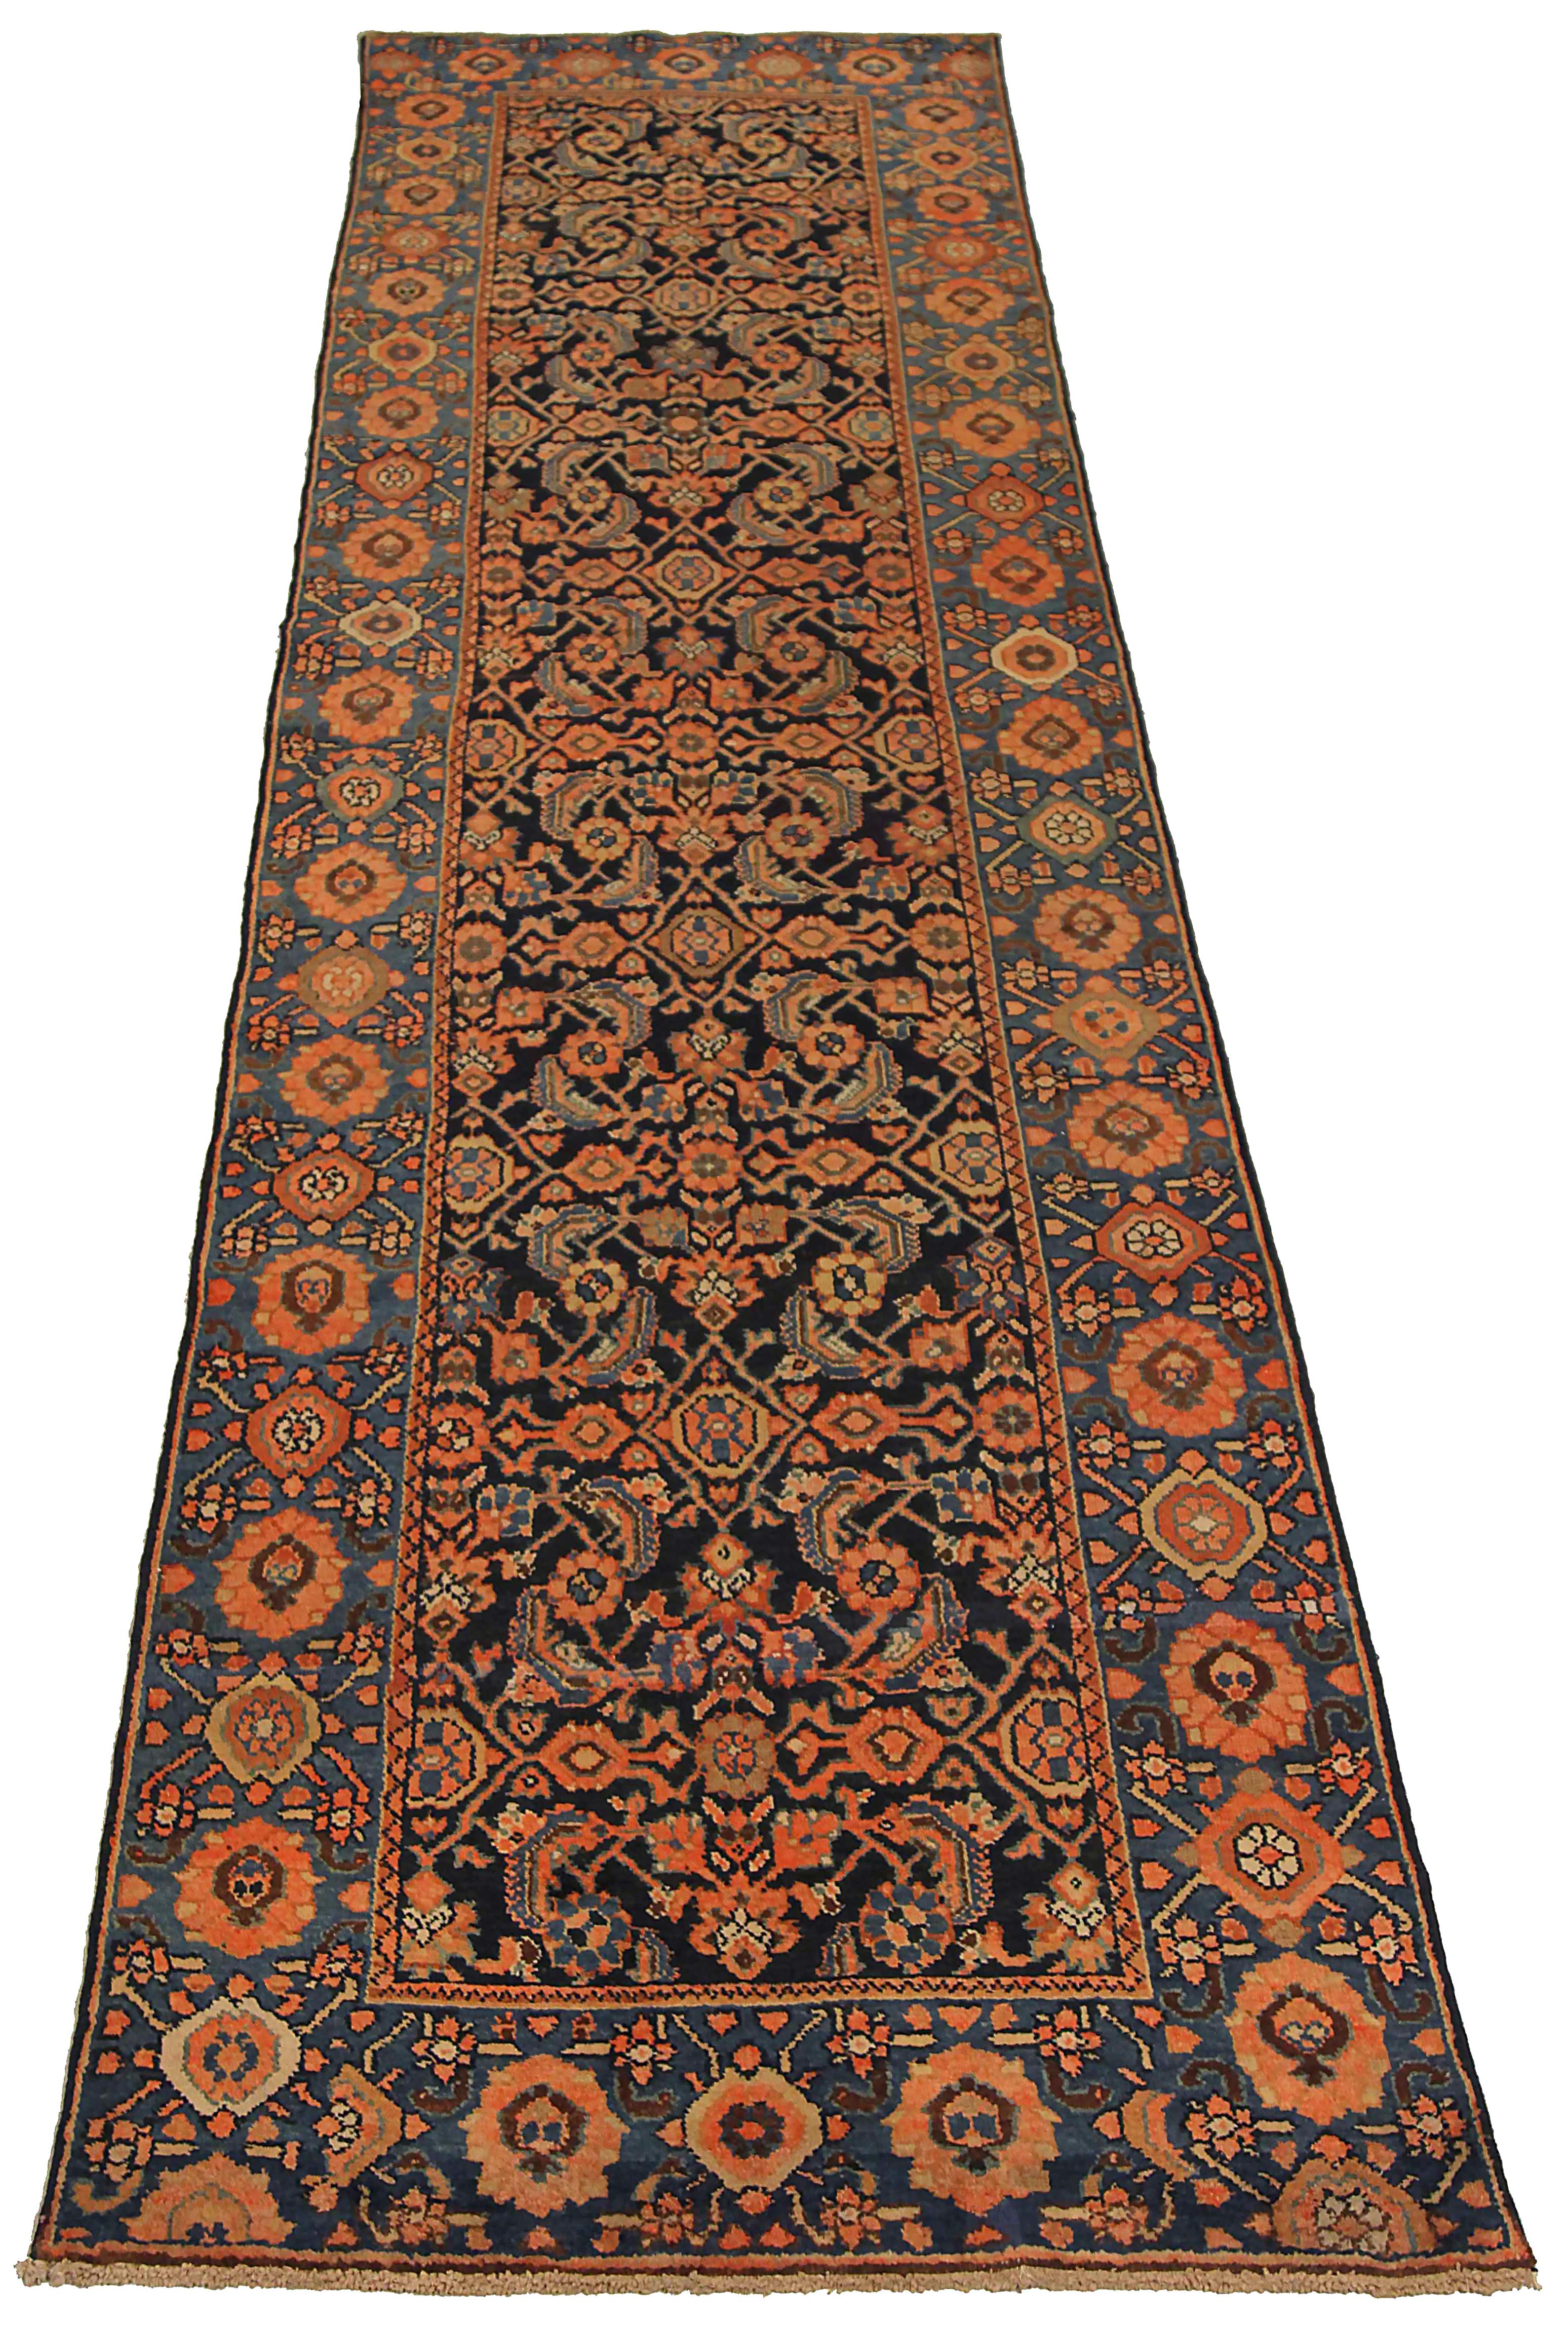 Antique Persian runner rug handwoven from the finest sheep’s wool. It’s colored with all-natural vegetable dyes that are safe for humans and pets. It’s a traditional Malayer design handwoven by expert artisans. It’s a lovely runner rug that can be